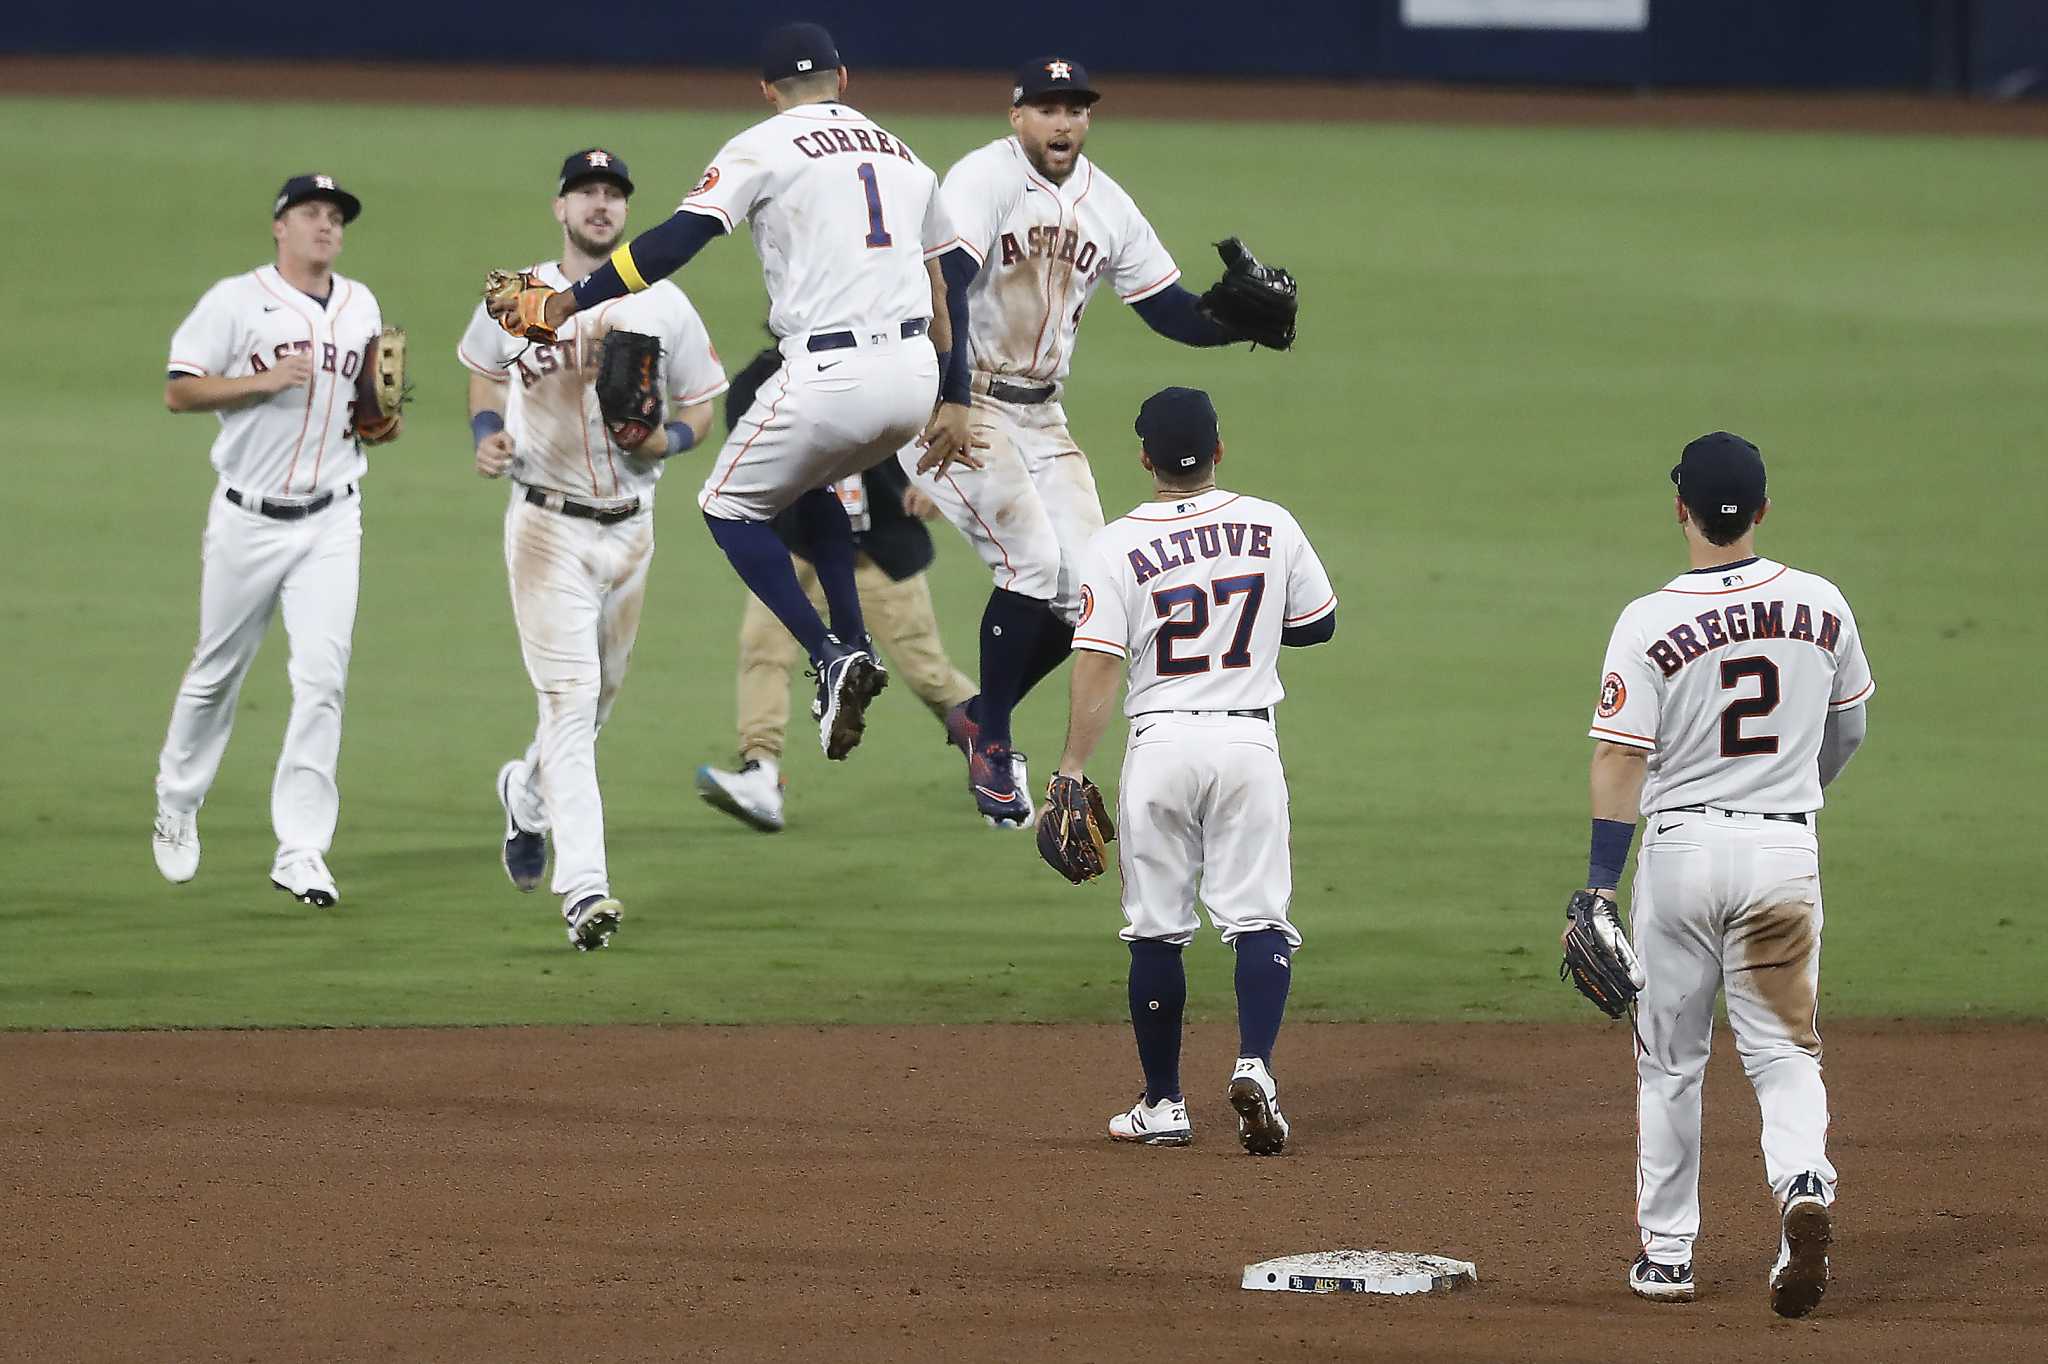 Jose Altuve Launches Home Run, Doesn't Have to Run the Bases For it To Count